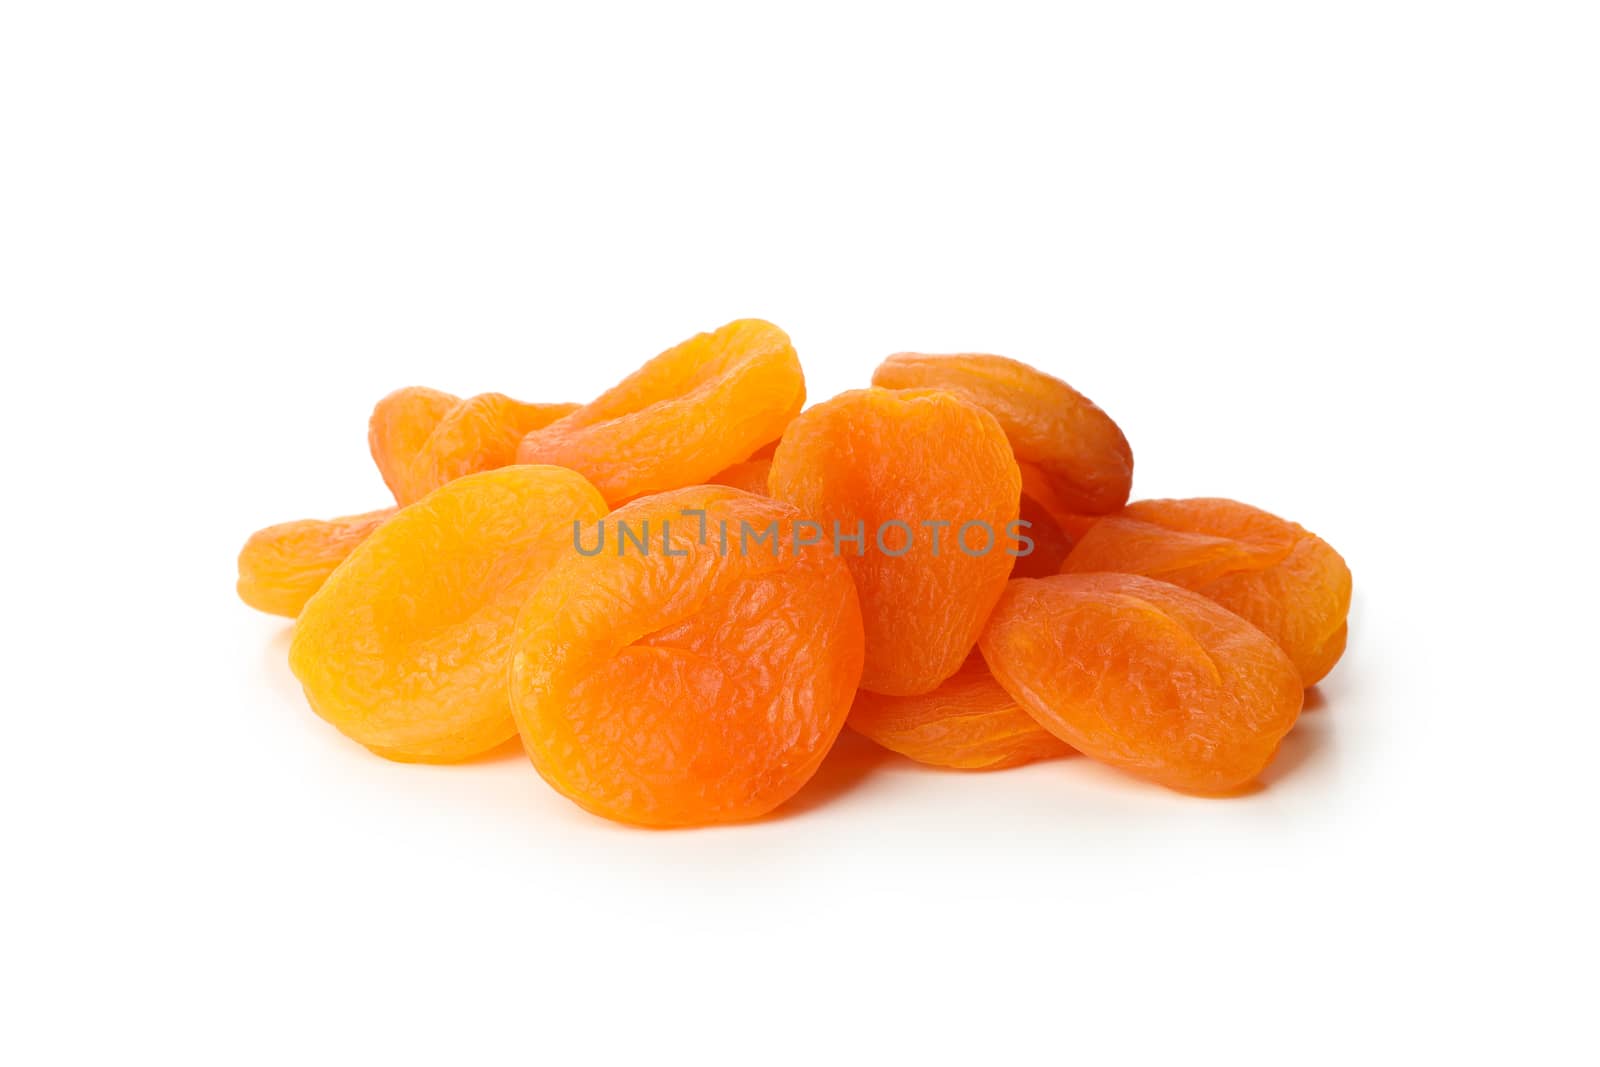 Tasty dried apricot isolated on white background